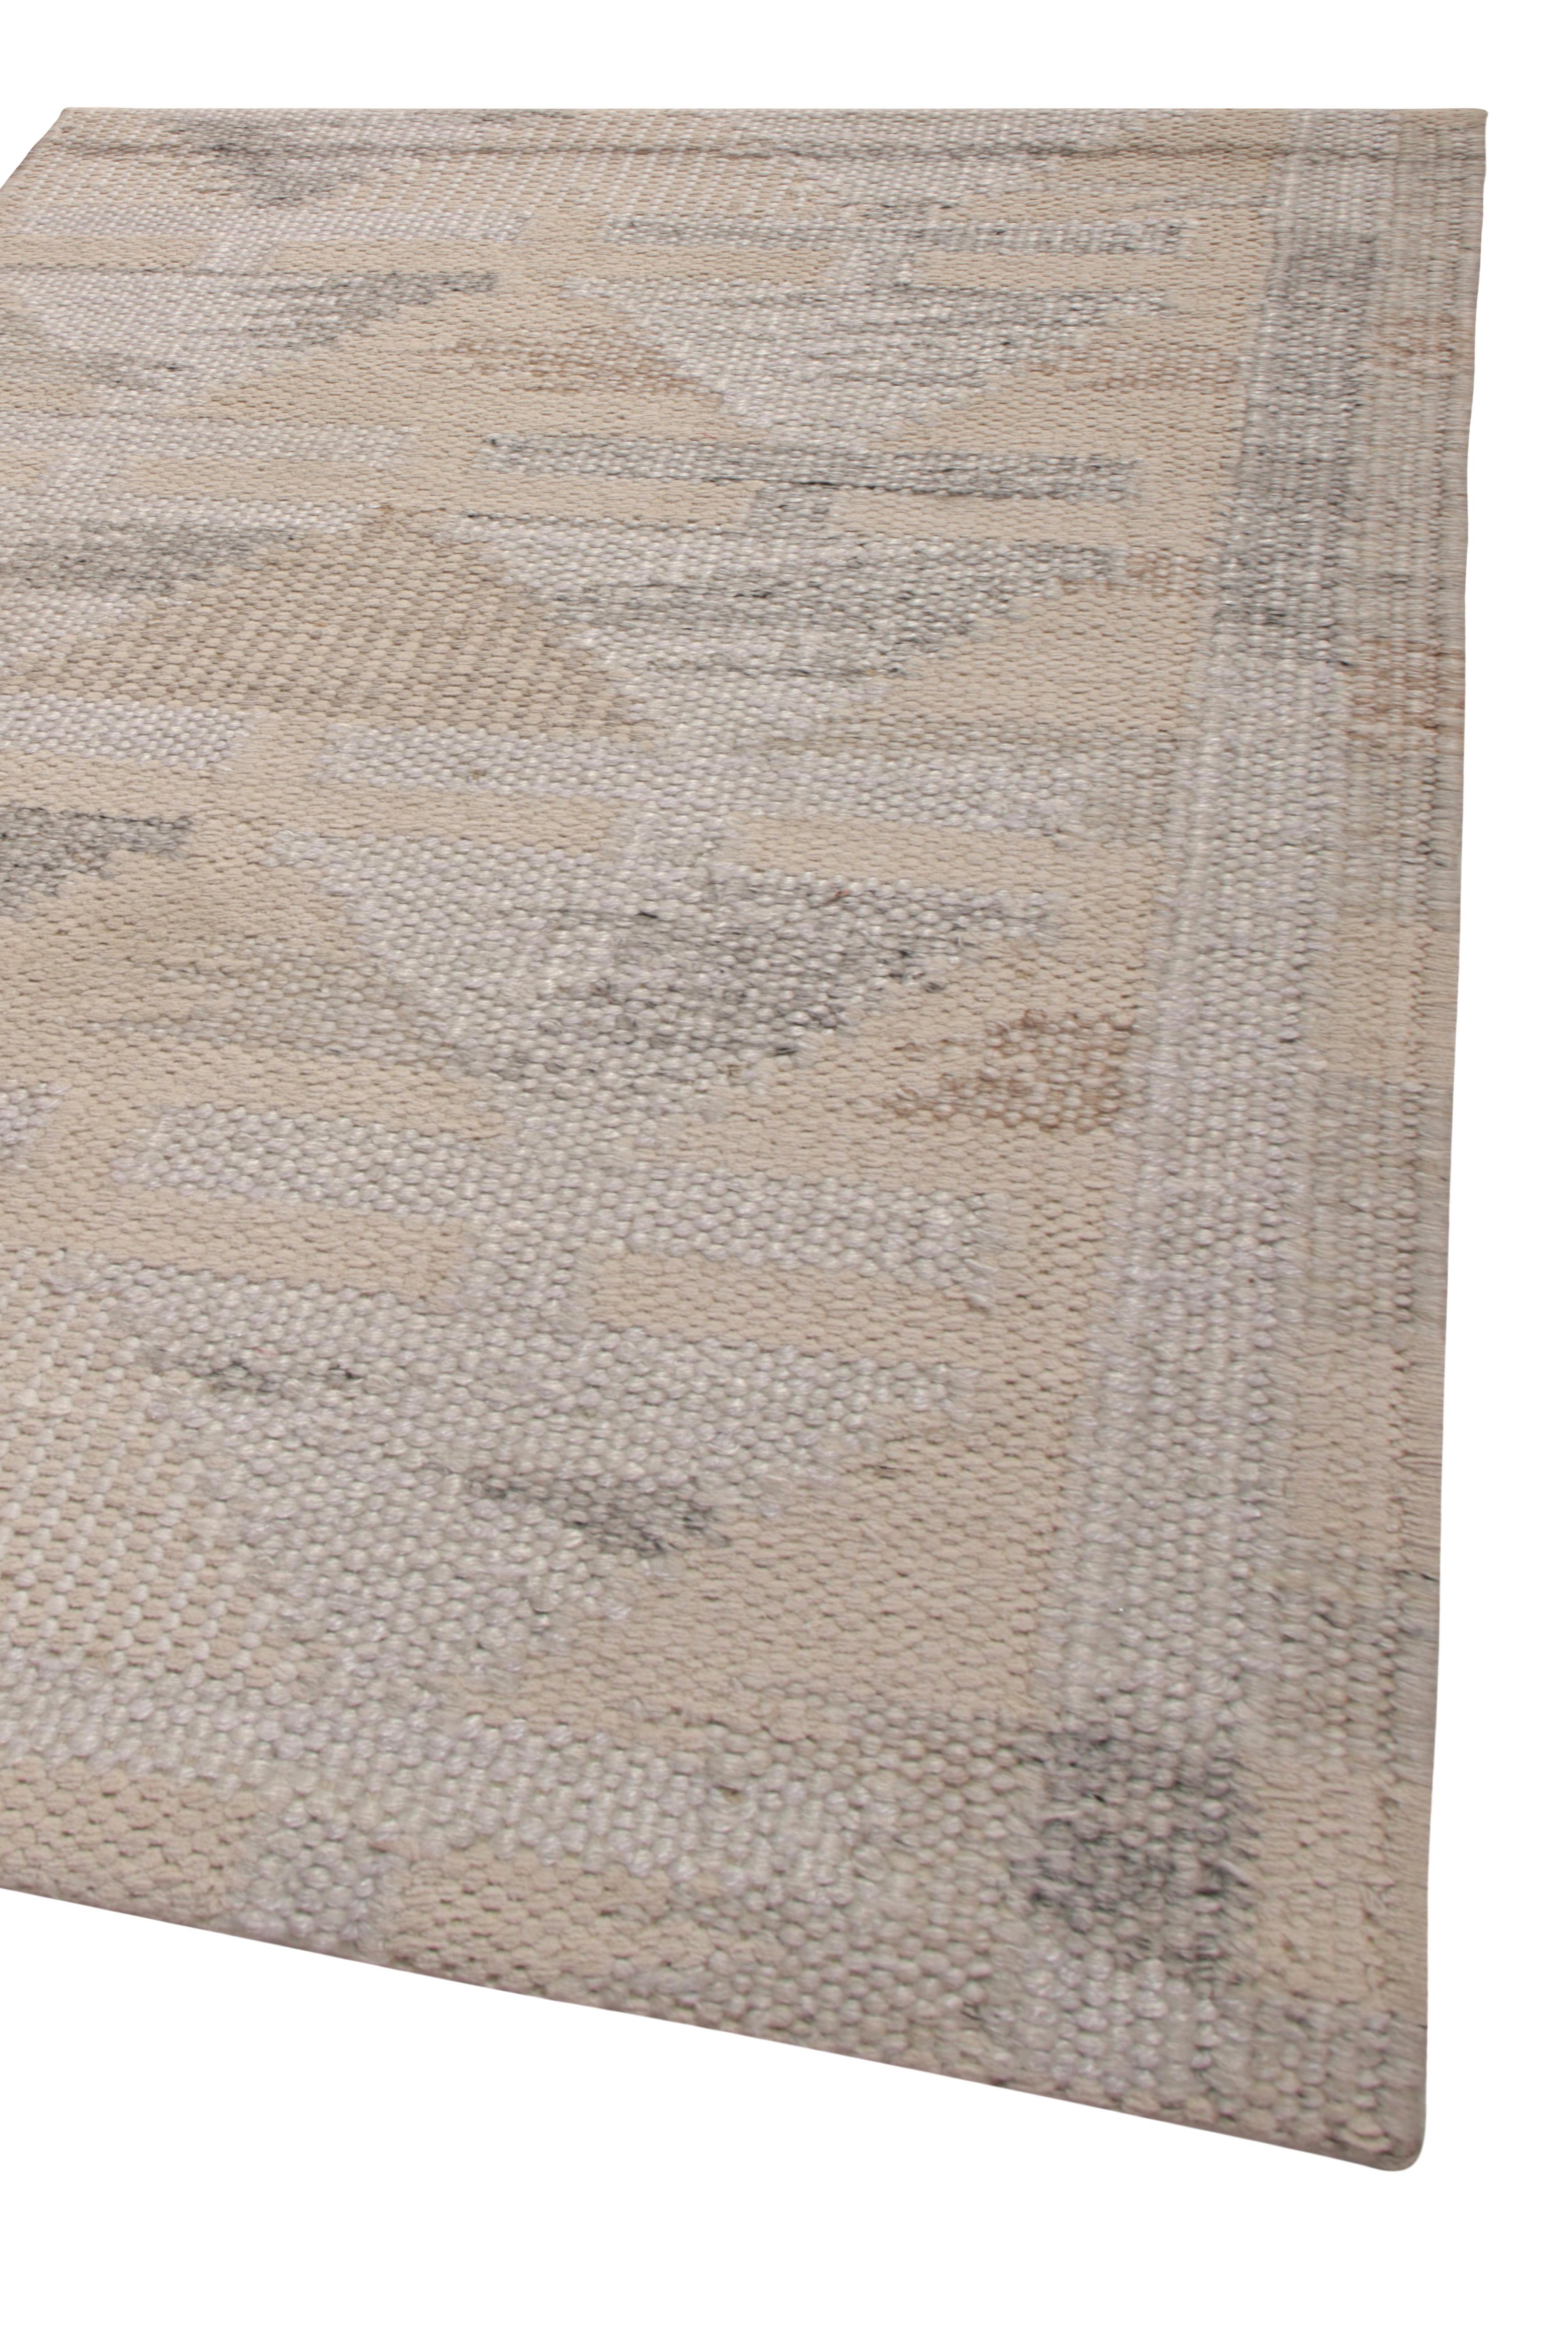 Indian Rug & Kilim’s Scandinavian Style Gift-Size Kilim in Gray and Beige Patterns